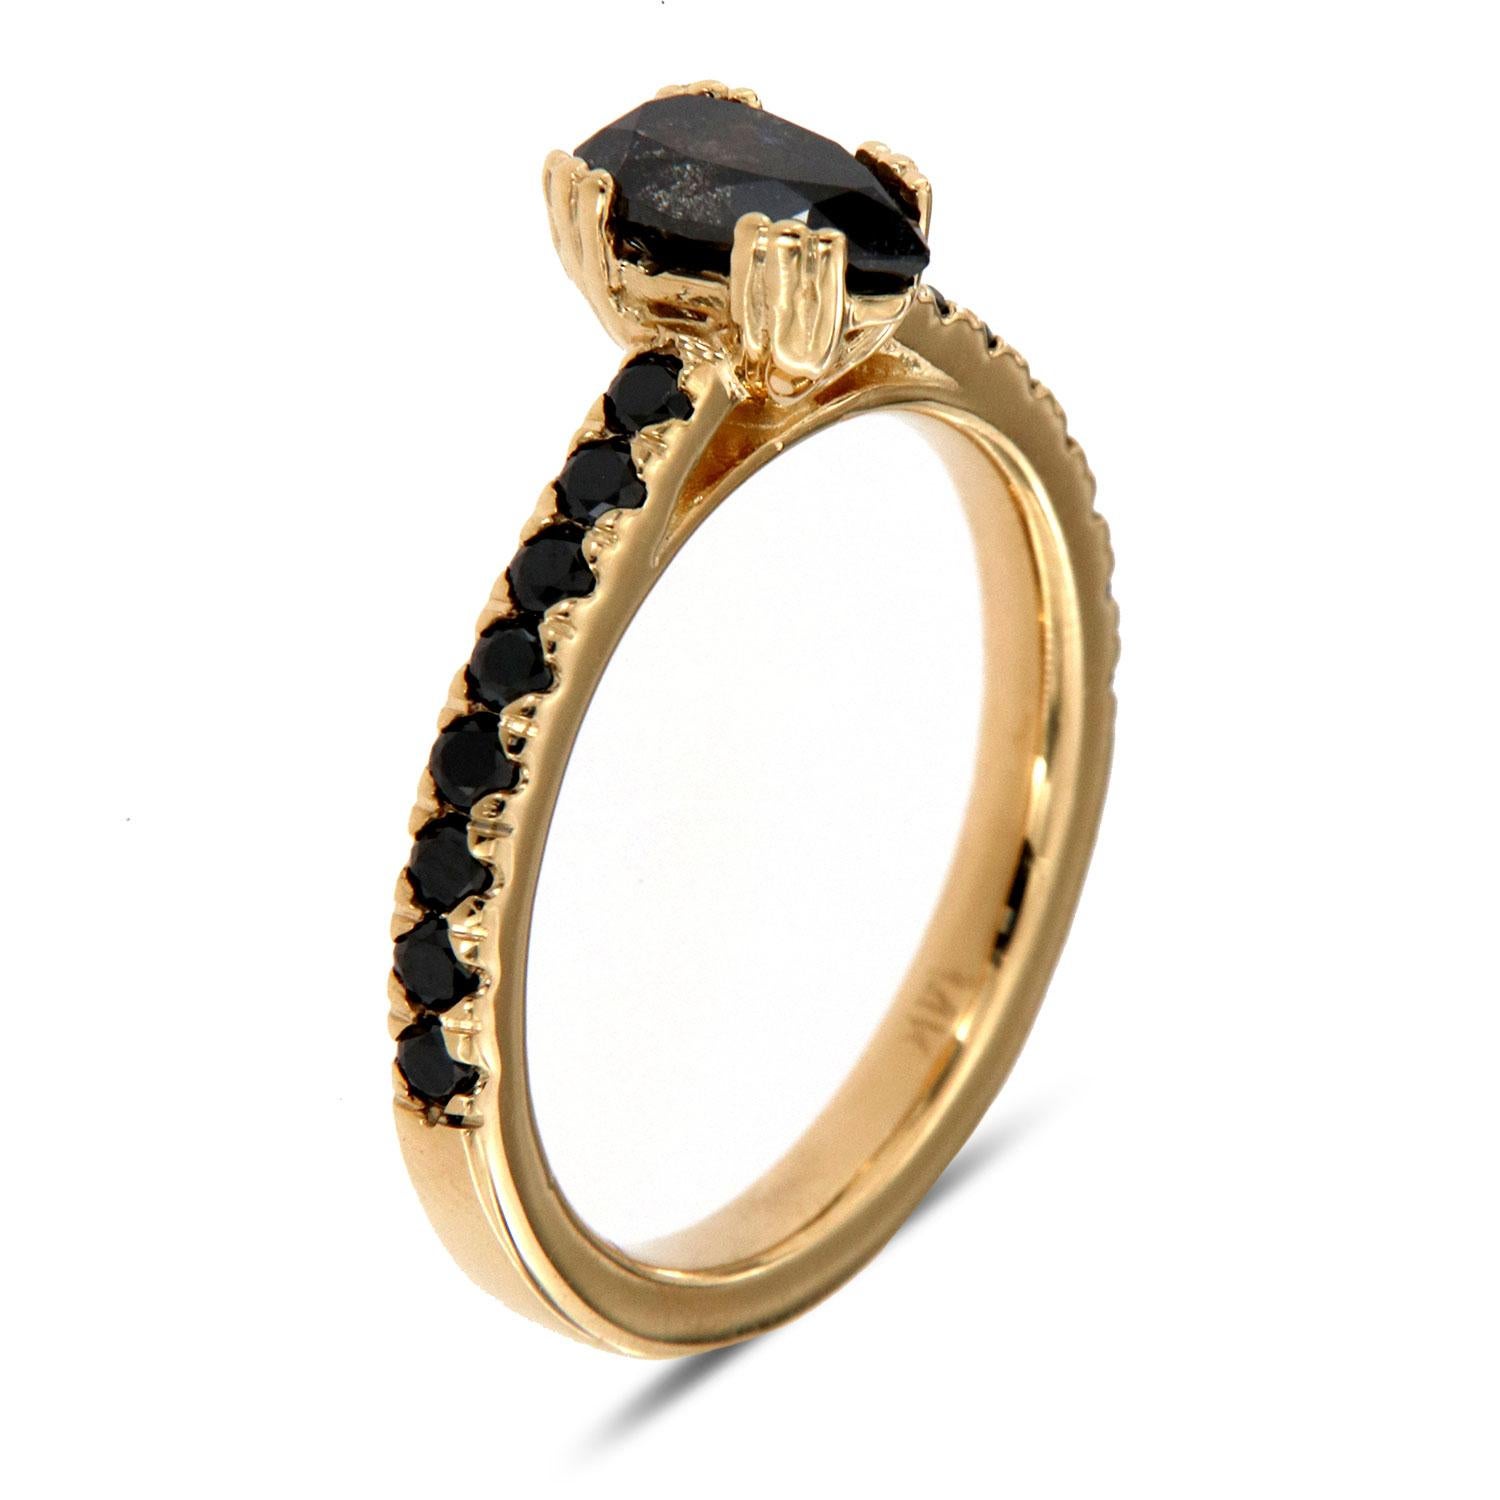 This Rustic design ring features sixteen( 16) Round shaped Black diamonds set alongside of a 1.7 MM wide band. In the center of the ring is set 3/4 carat Salt and Pepper placed in twelve (12) delicate prongs to enhance its rustic appeal. Experience